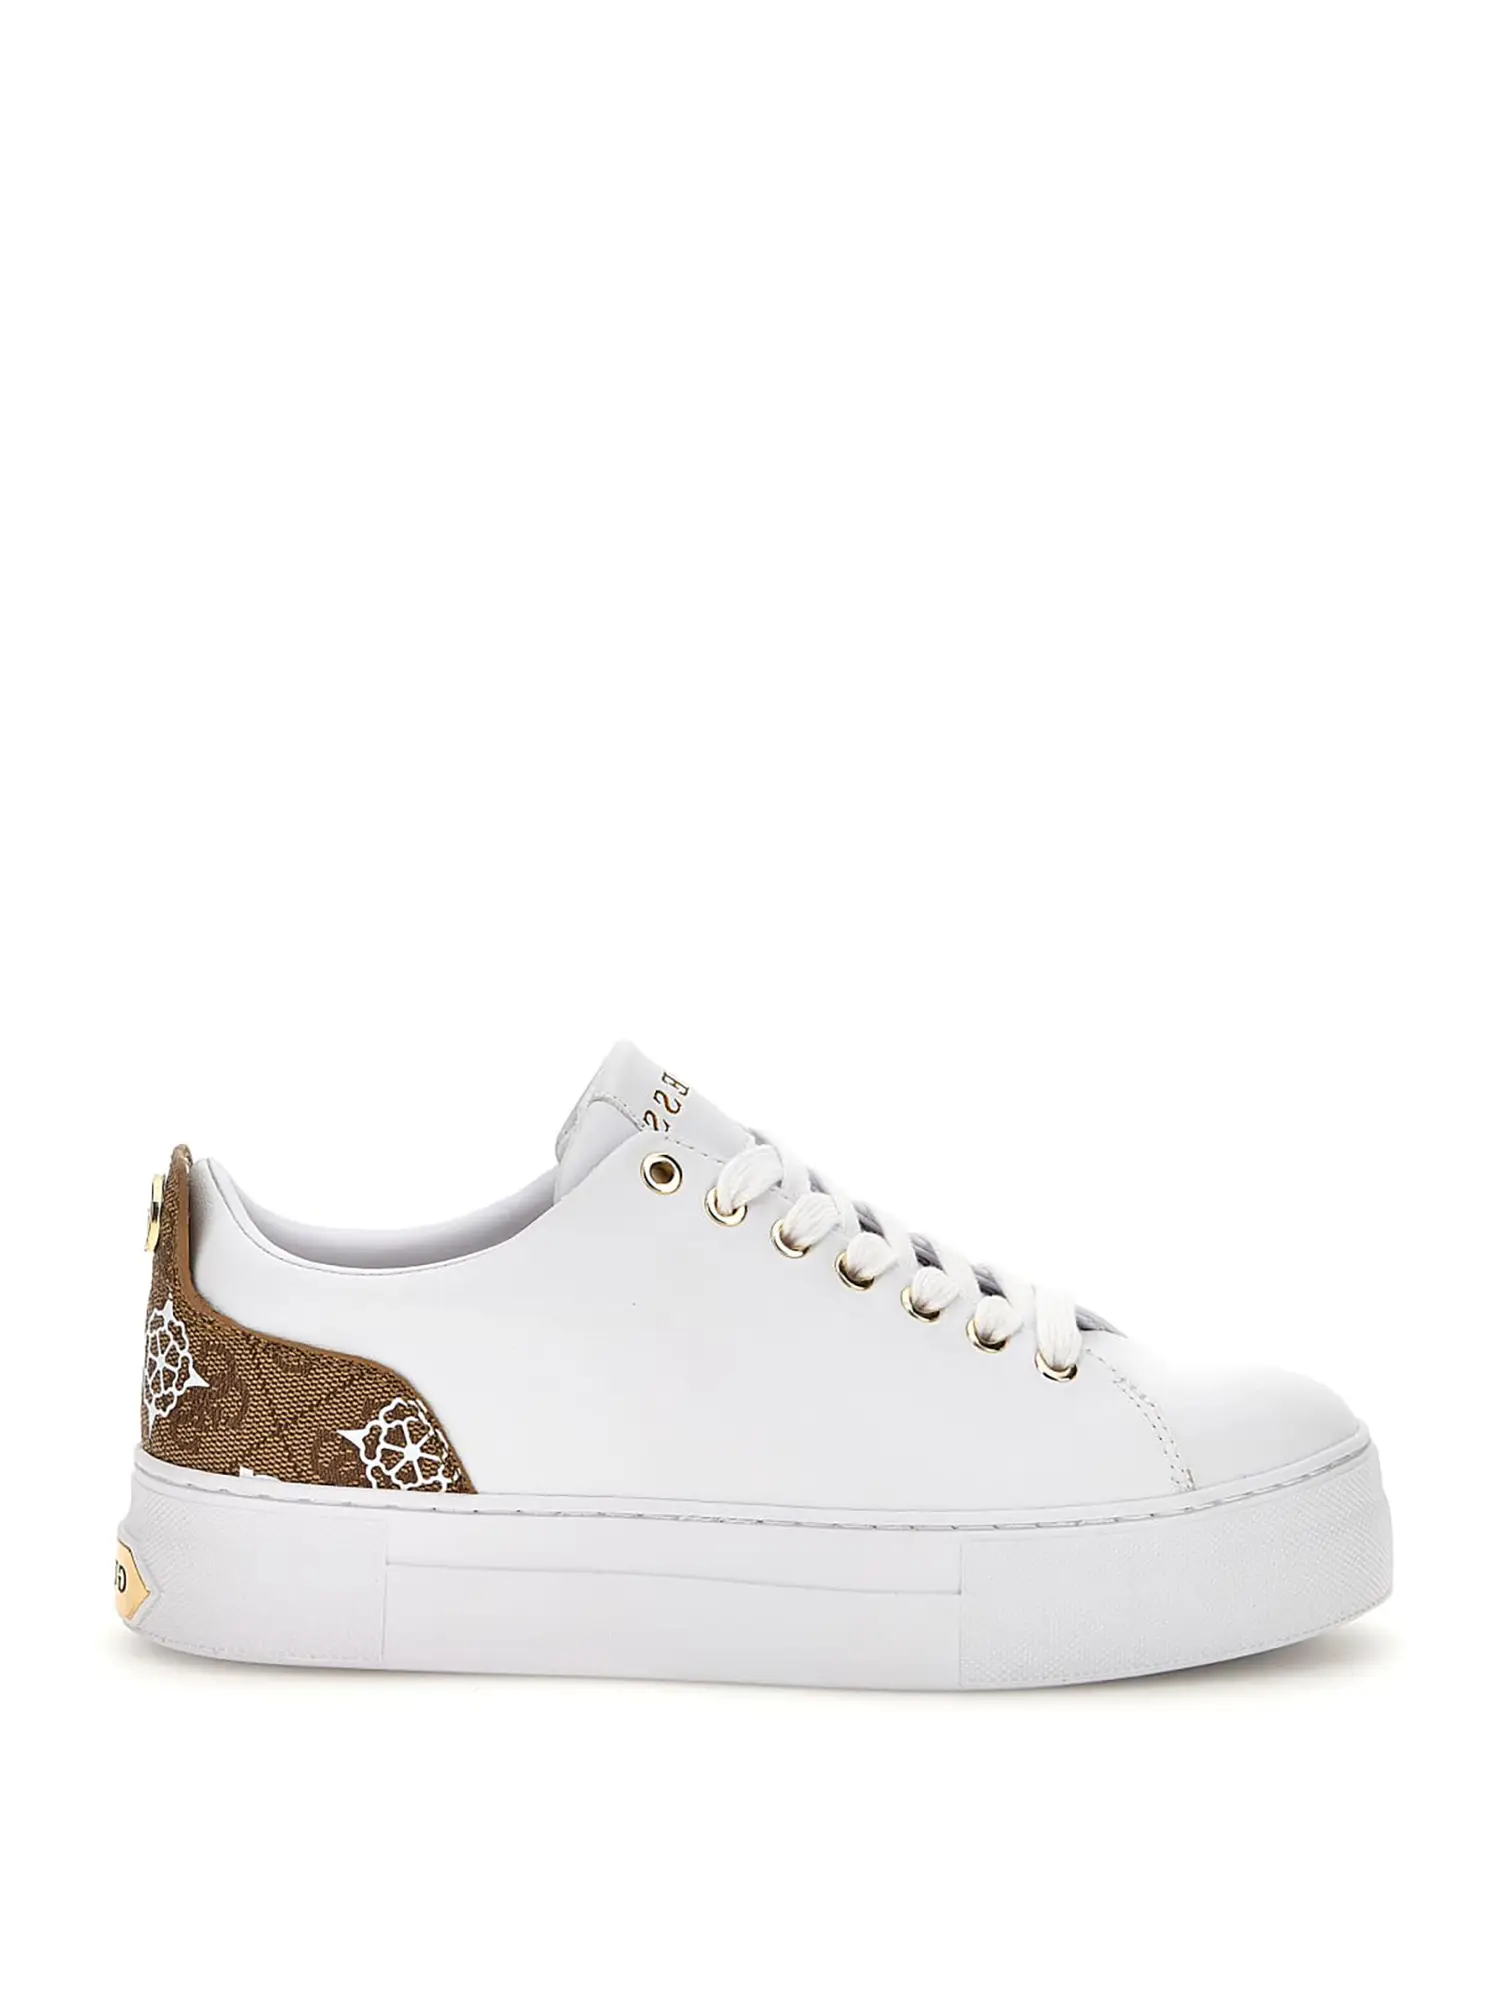 SNEAKERS DONNA - GUESS - FLPGN4 ELE12 - BIANCO, 40